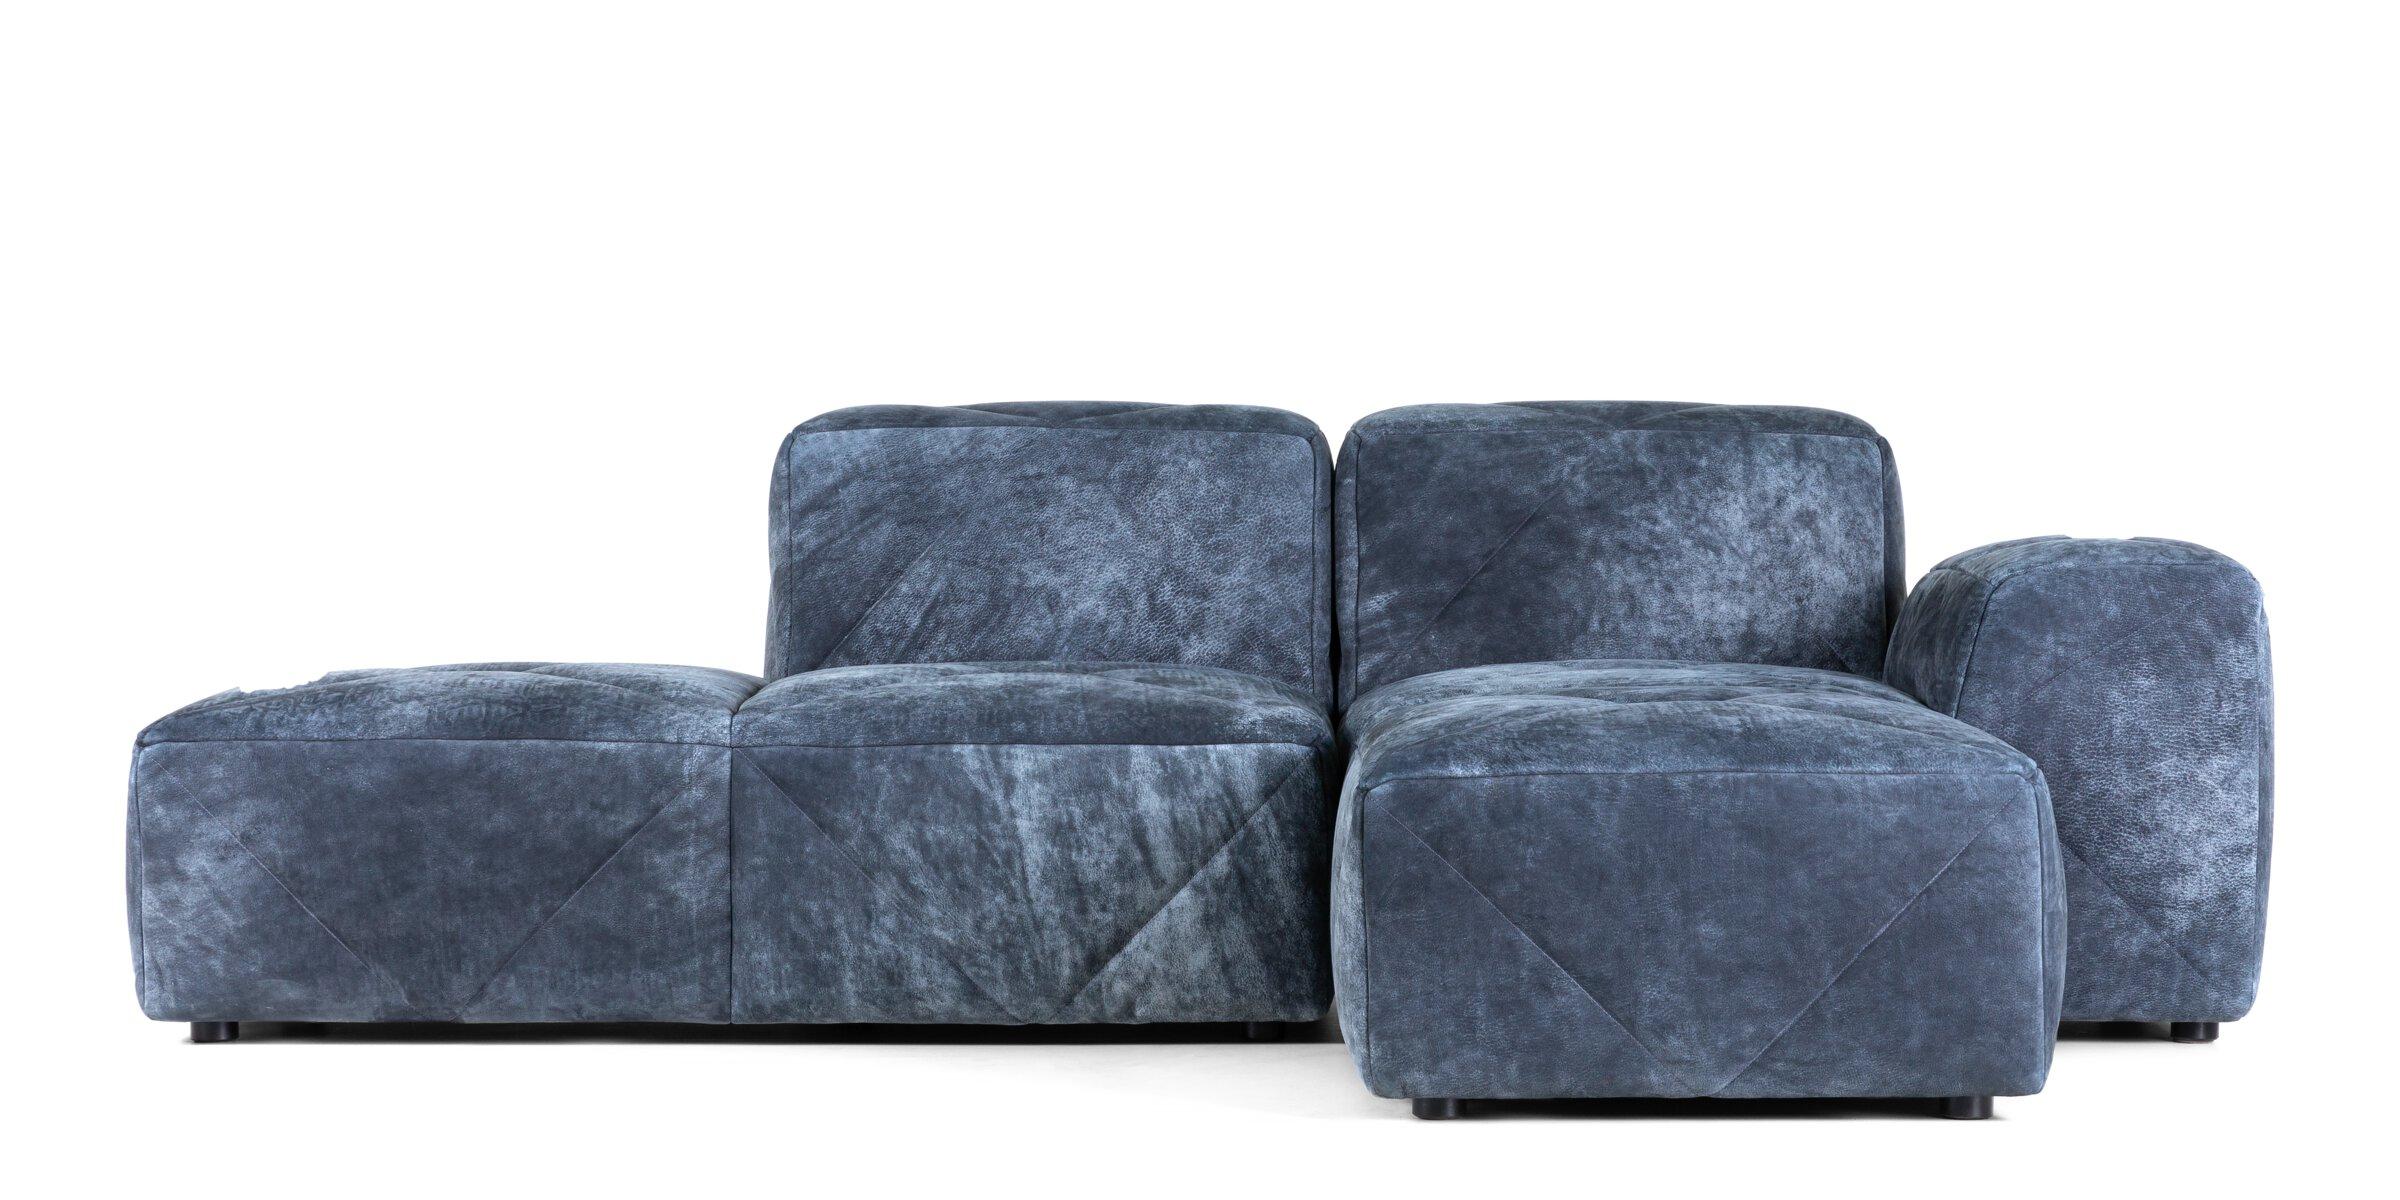 The award-winning BFF sofa by Marcel Wanders is everyone's new best friend! A high quality, soft yet firm modular sofa system, consisting of a wide variety of modules for endless configurations. A modular sofa system that will befriend any interior.